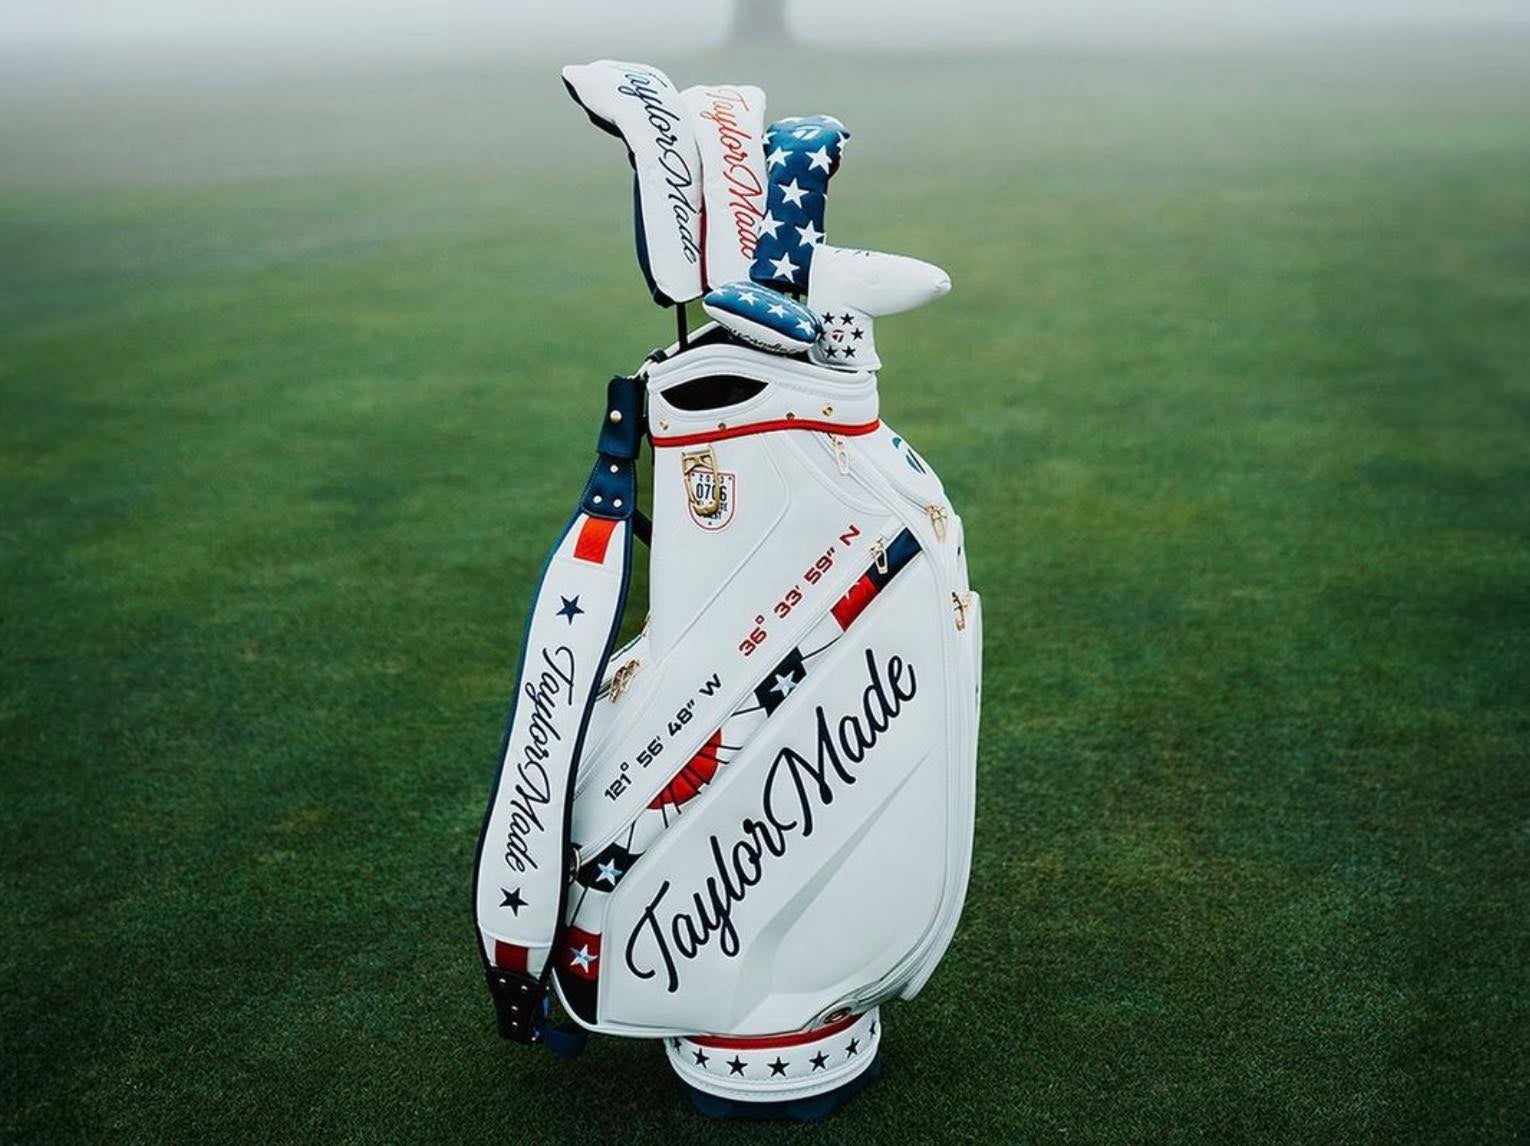 Callaway, TaylorMade bring limitededition bags to the U.S. Women's Open